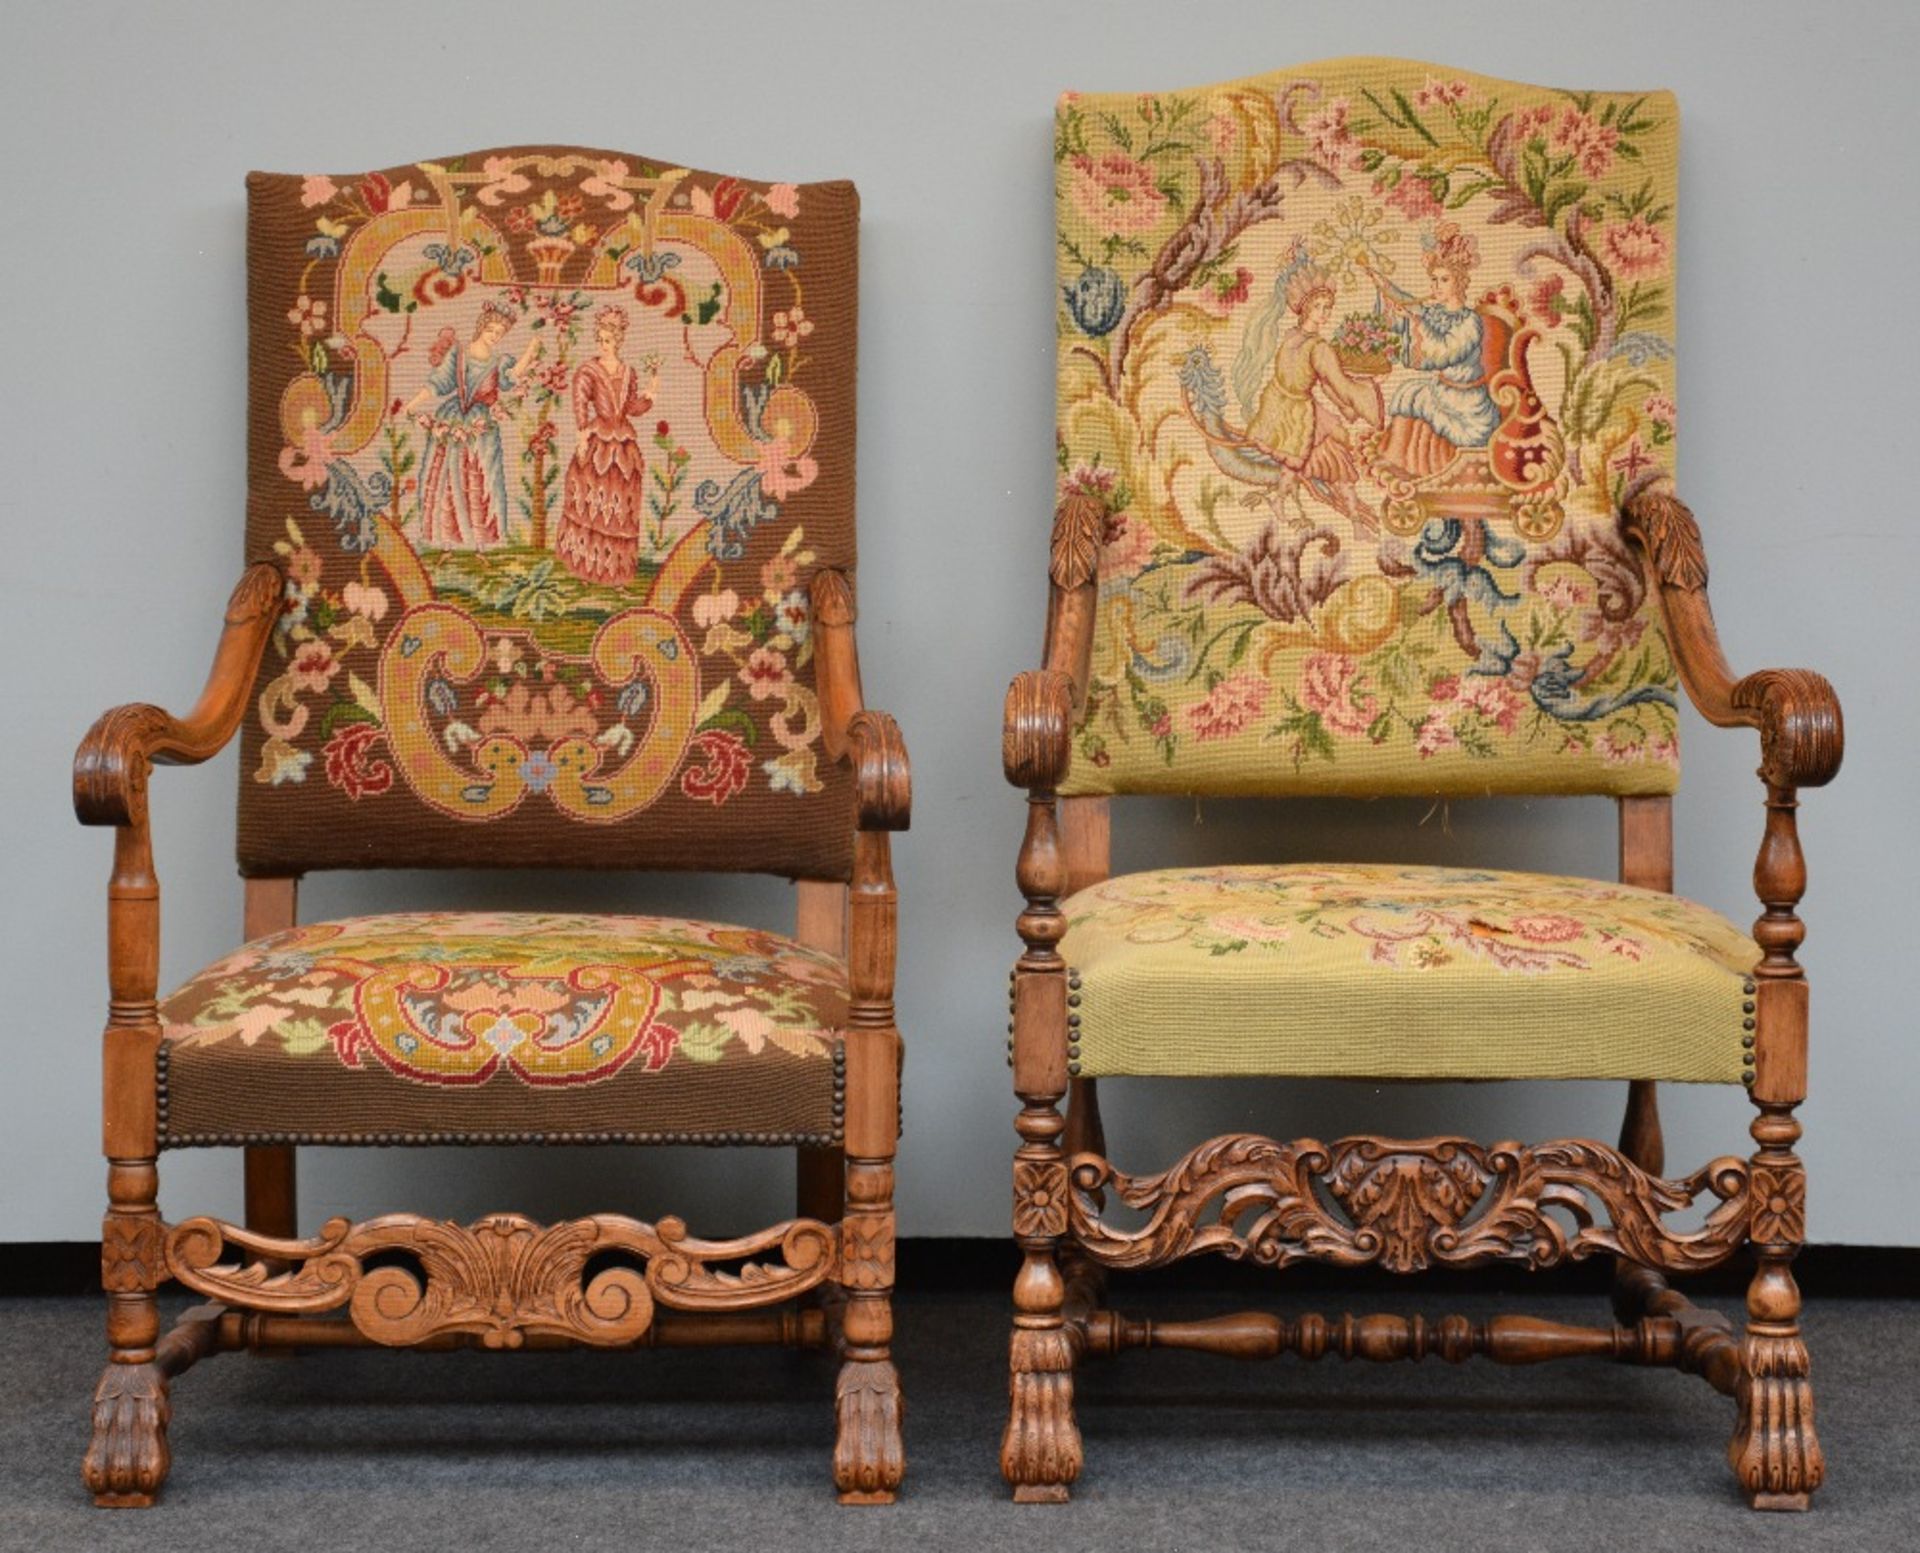 Two richly carved LXV-style armchairs with 'gros point' upholstery, H 111,5 / 119,5 - W 68 cm